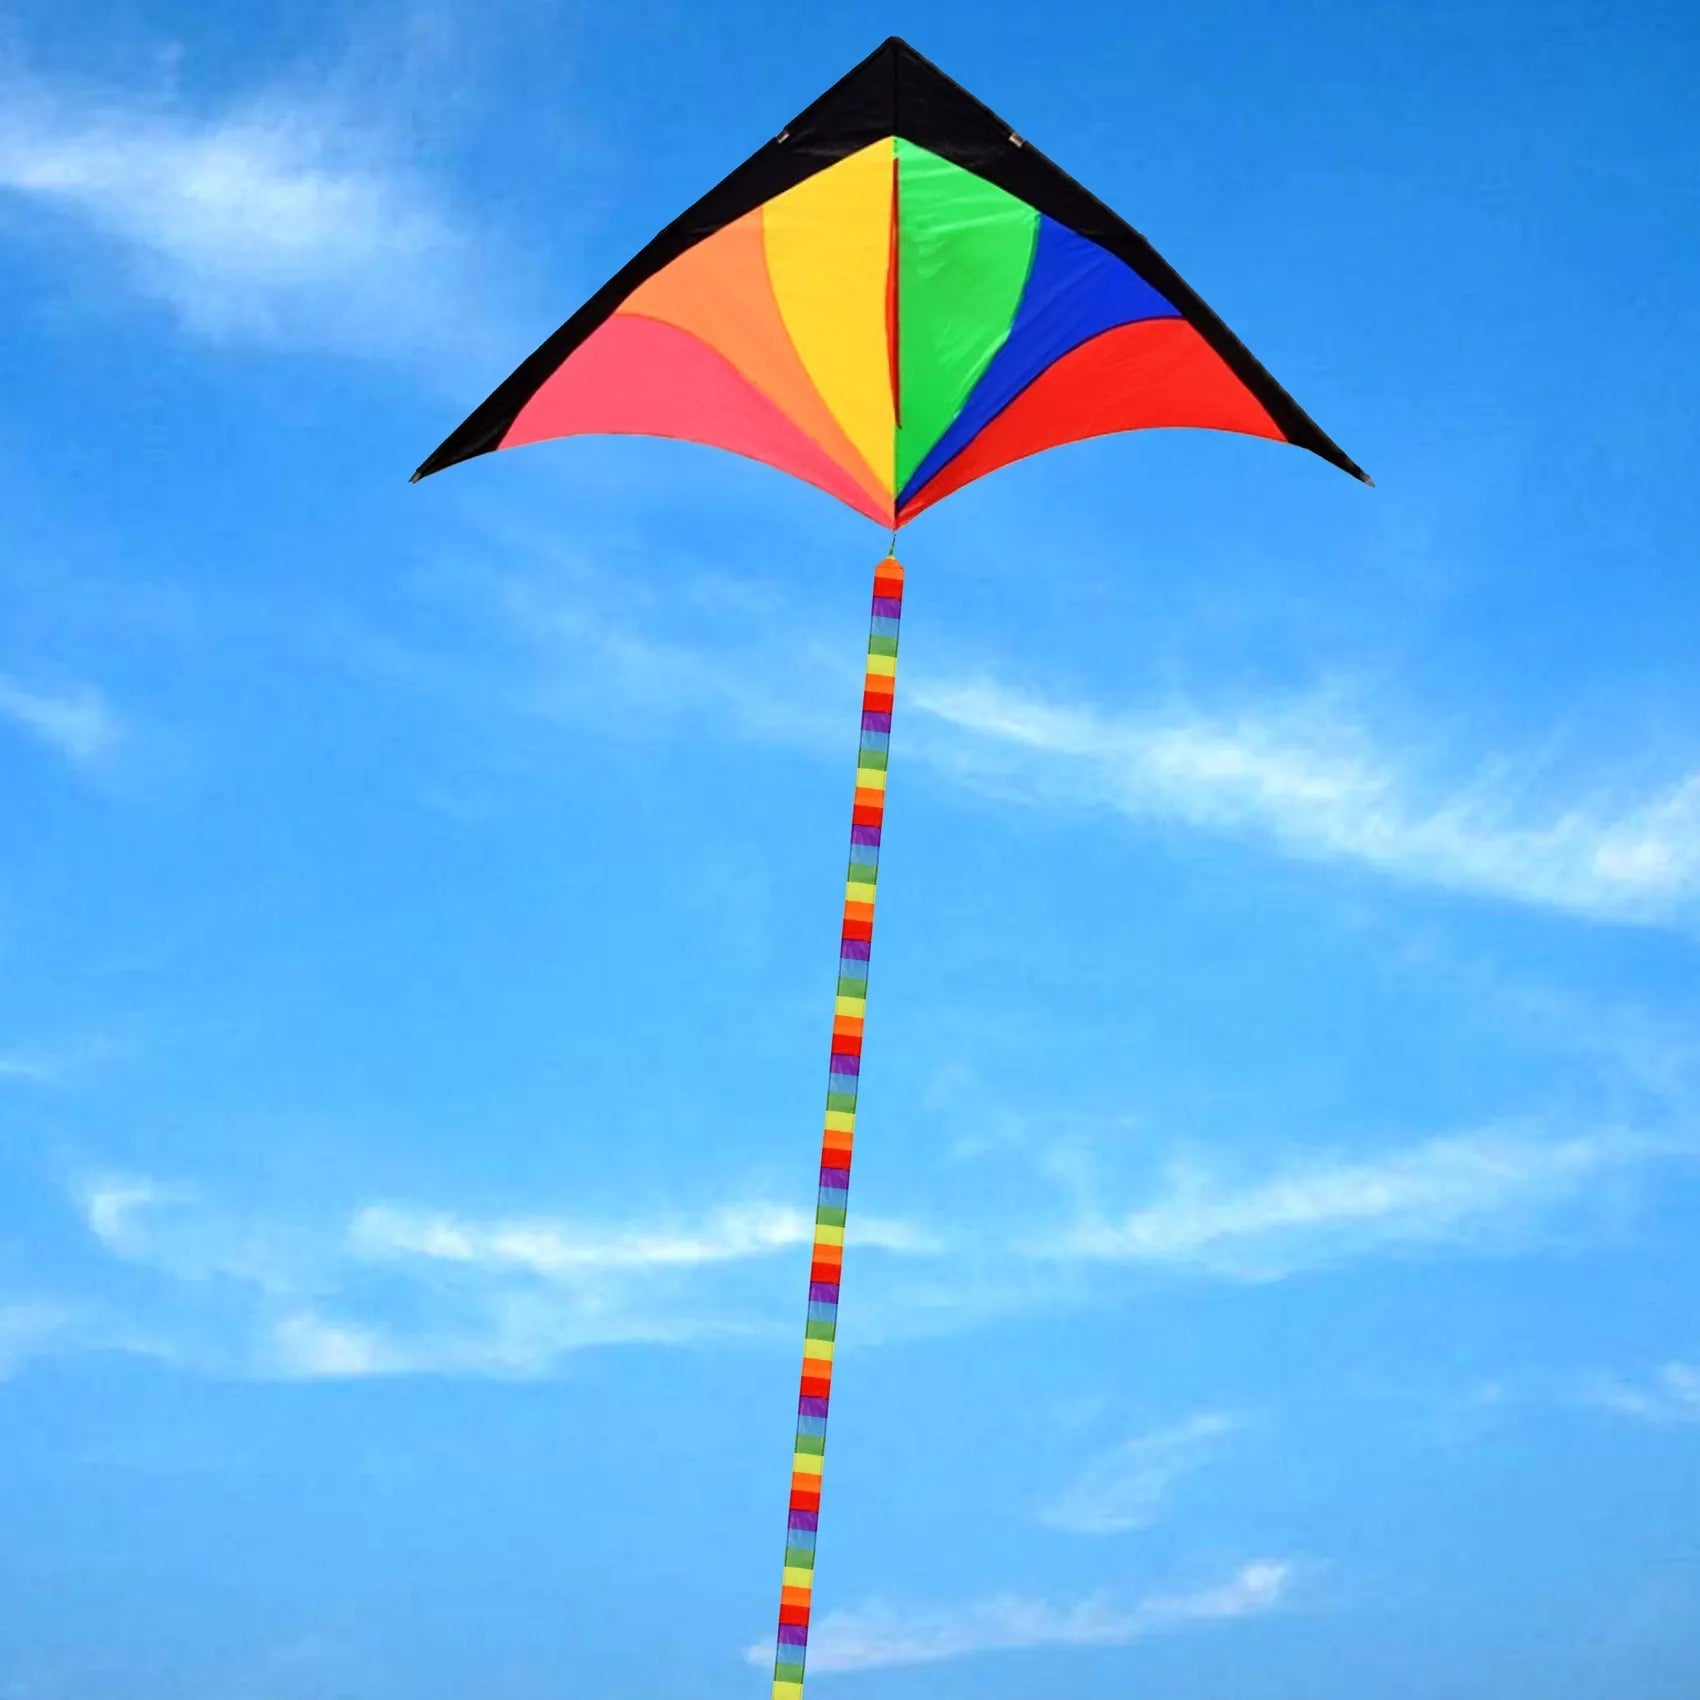 Colorful Nylon Kite Tail for Adding Beauty and Stability - ToylandEU